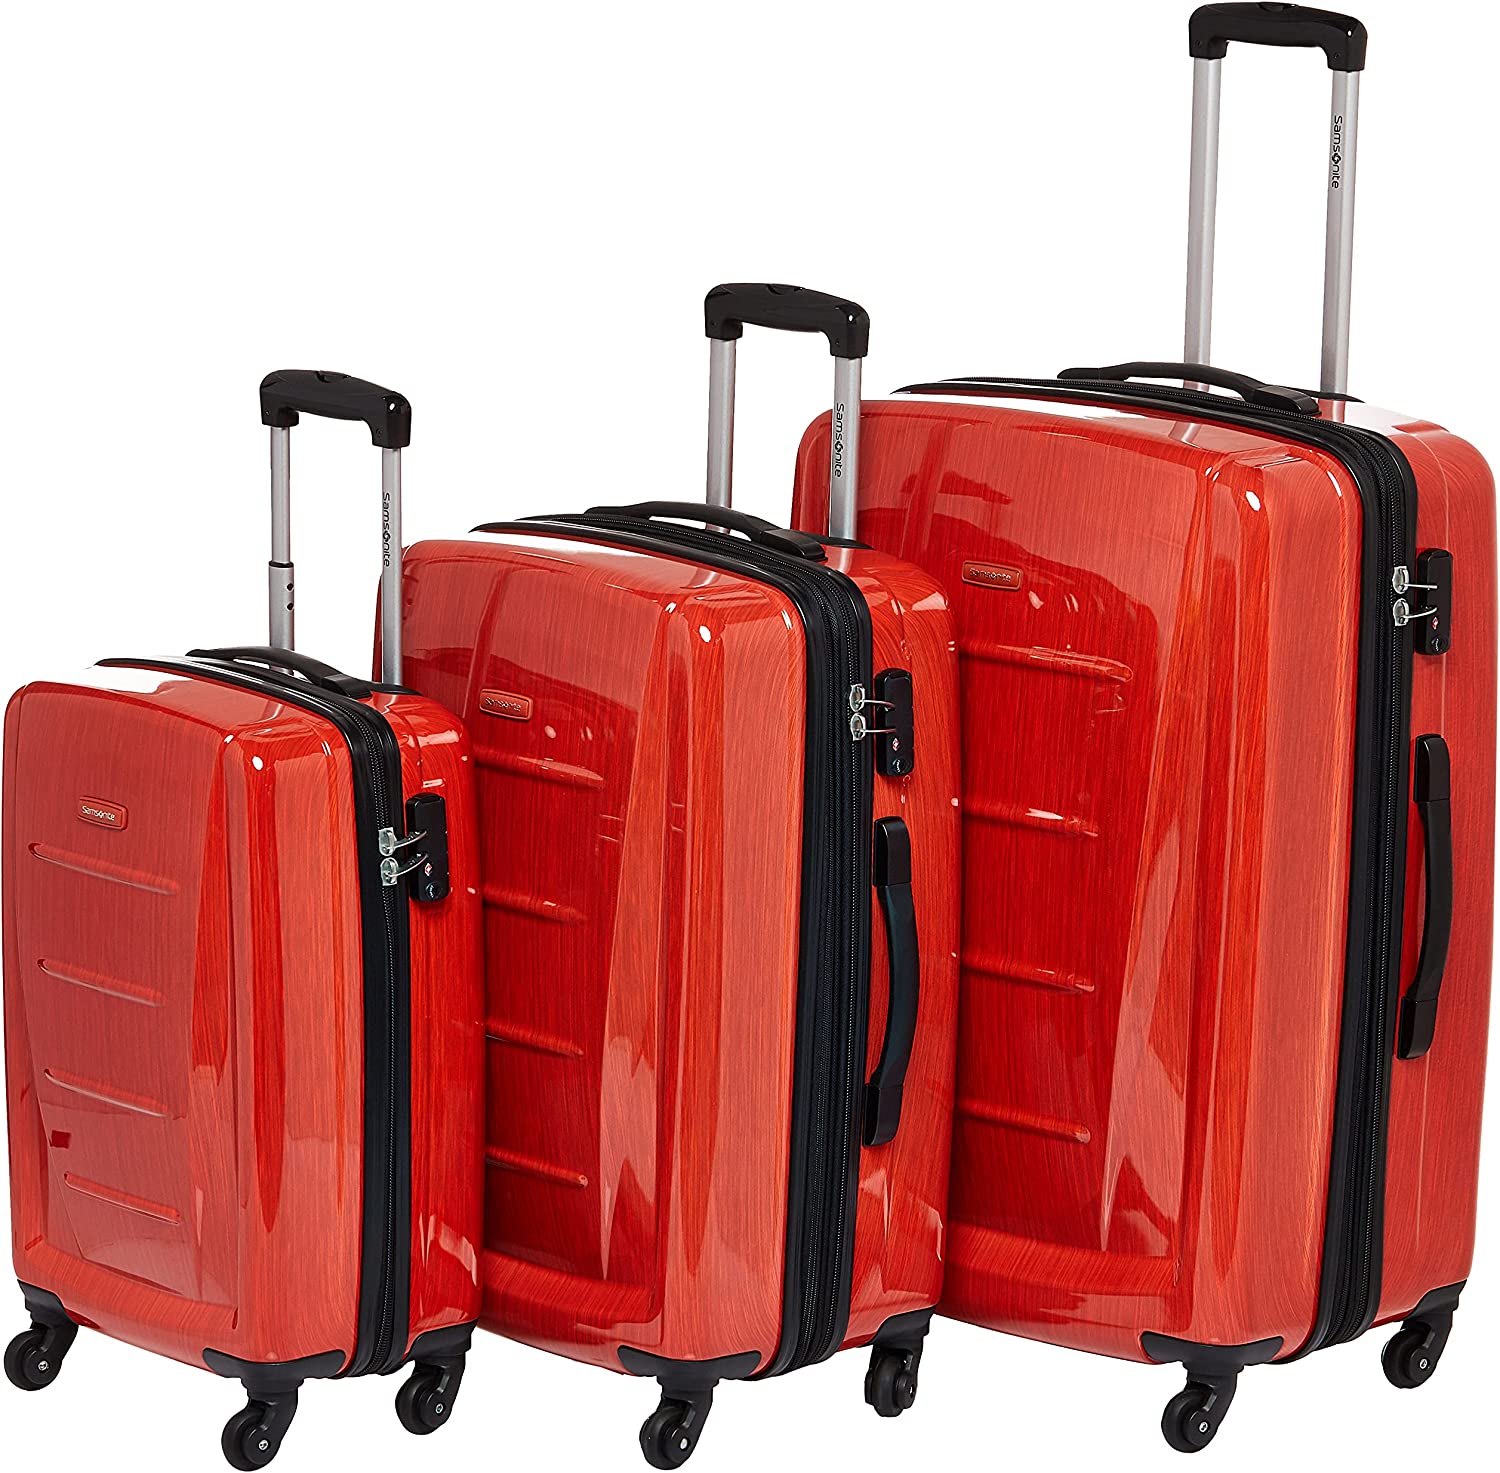 2 Hardside Luggage with Spinner Wheels 3-Piece Set